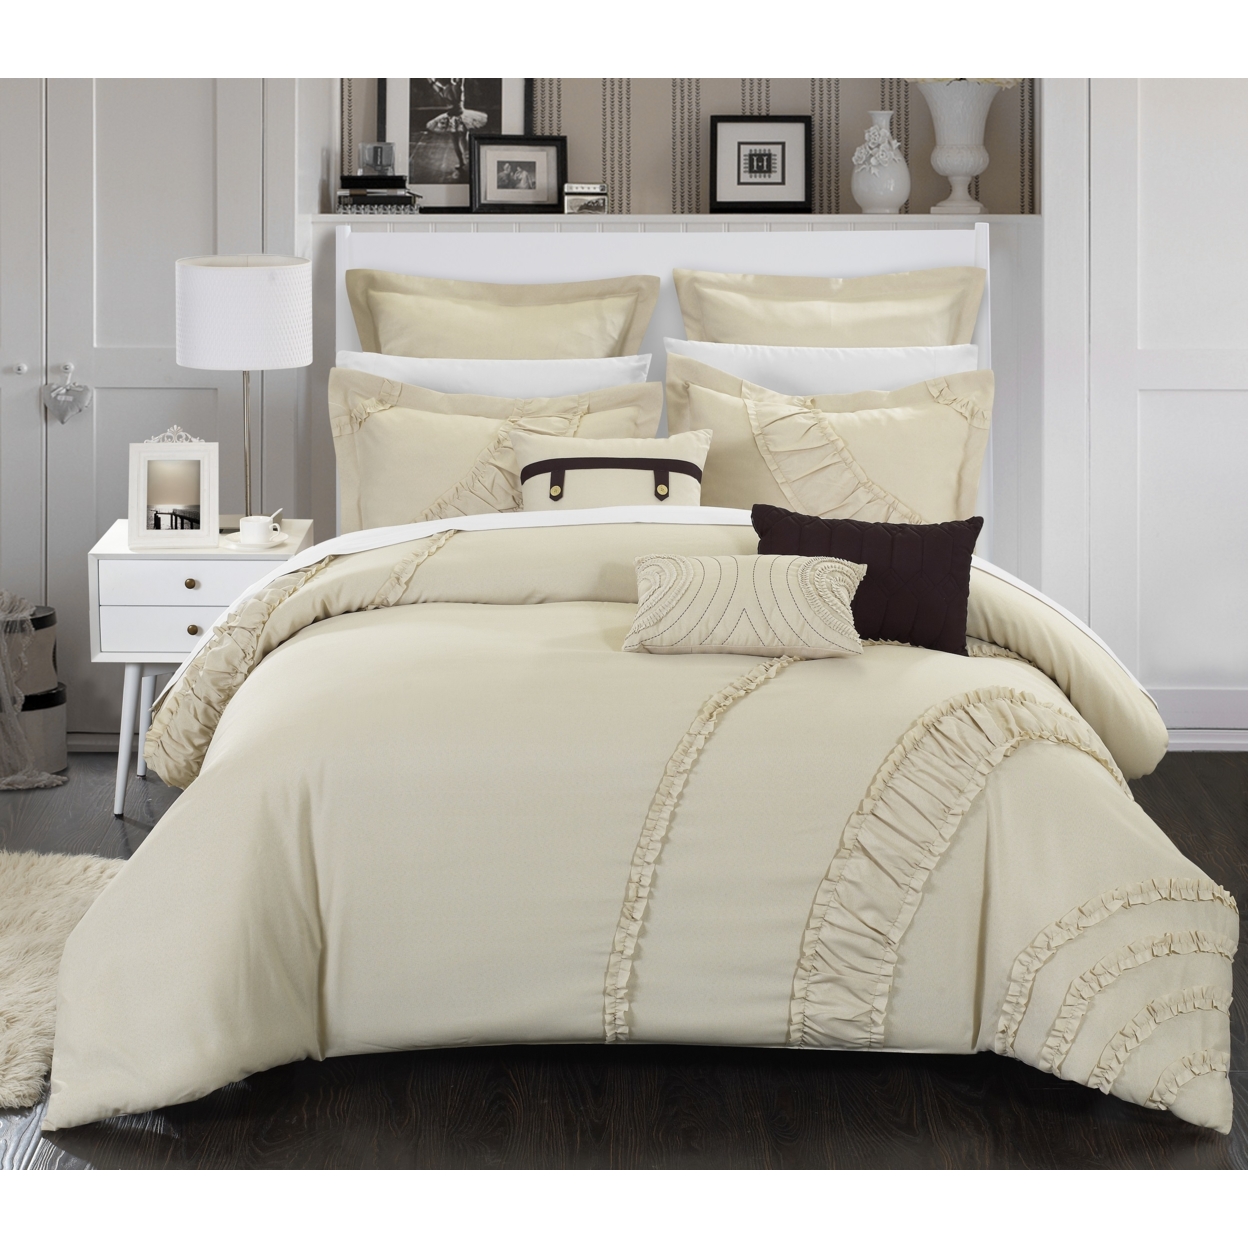 Chic Home 8 Piece Lucerne NEW FAUX LINEN FABRIC COLLECTION OVERSIZED AND OVERFILLED Embroidered Comforter Set - Beige, Queen